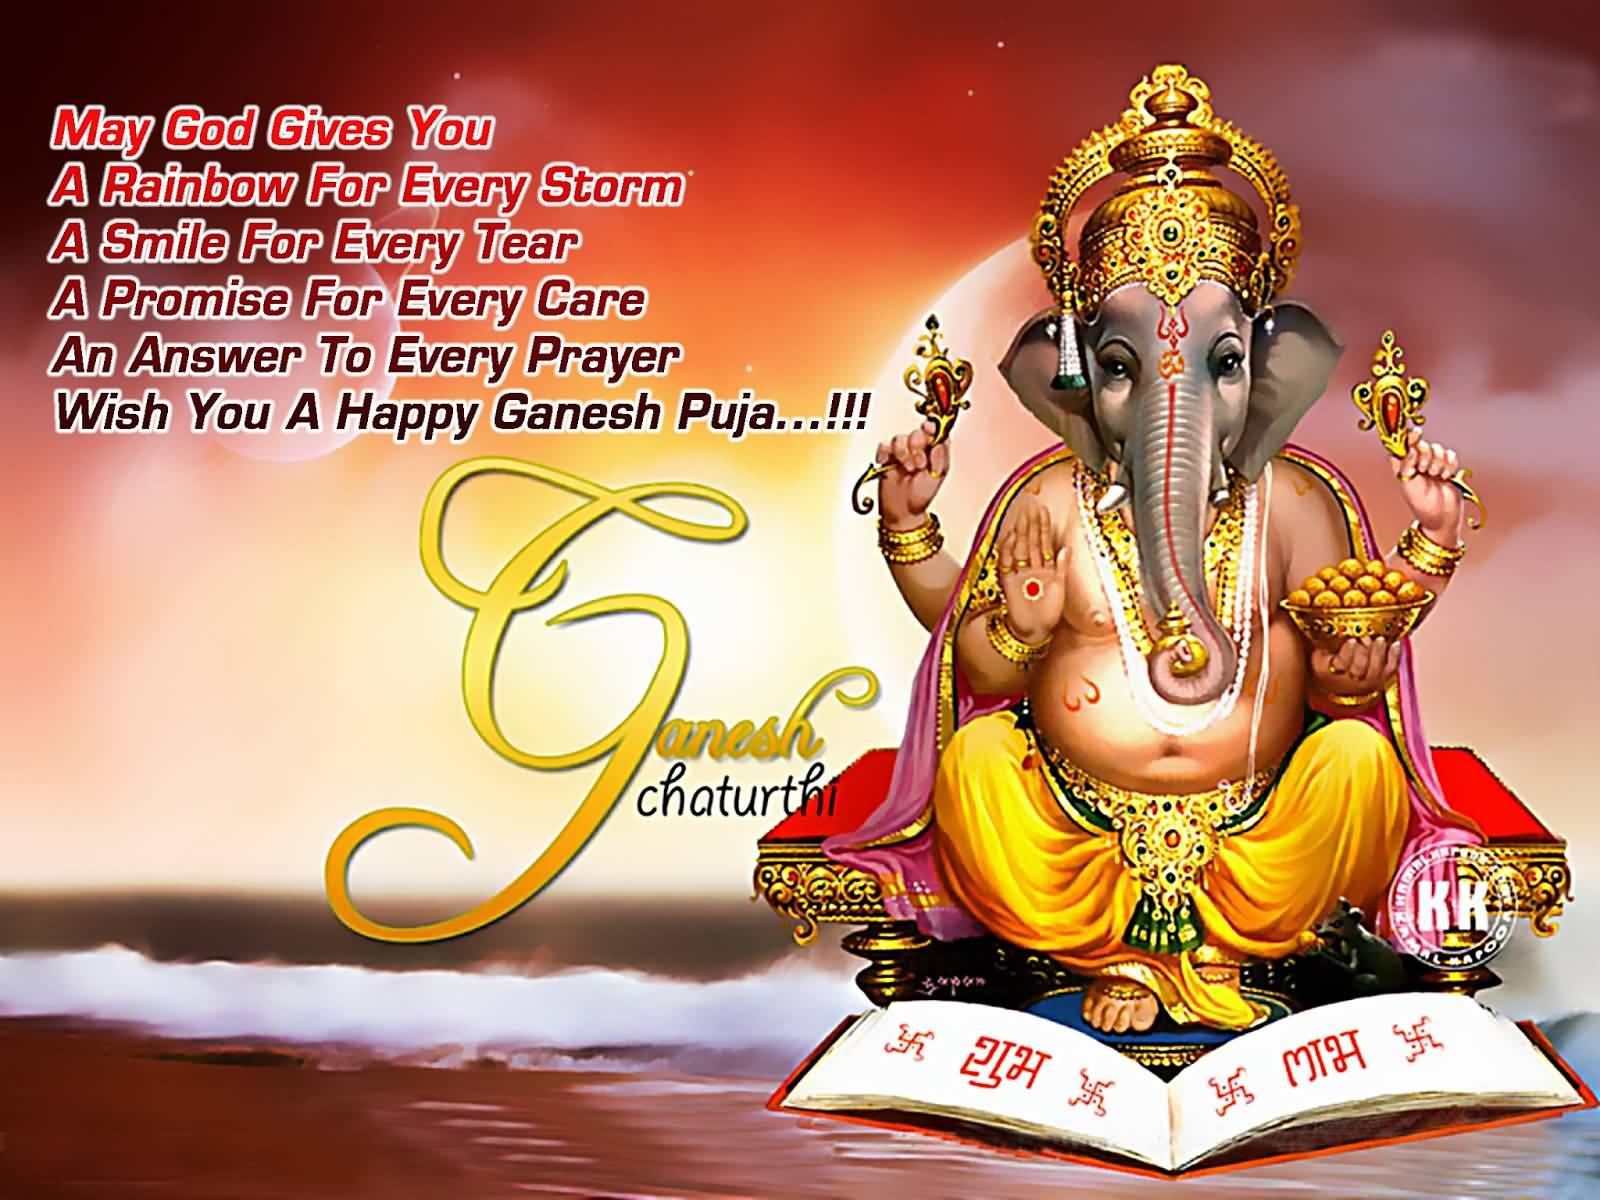 May God Give You A Rainbow For Every Storm Wish You A Happy Ganesh Puja Ganesh Chaturthi